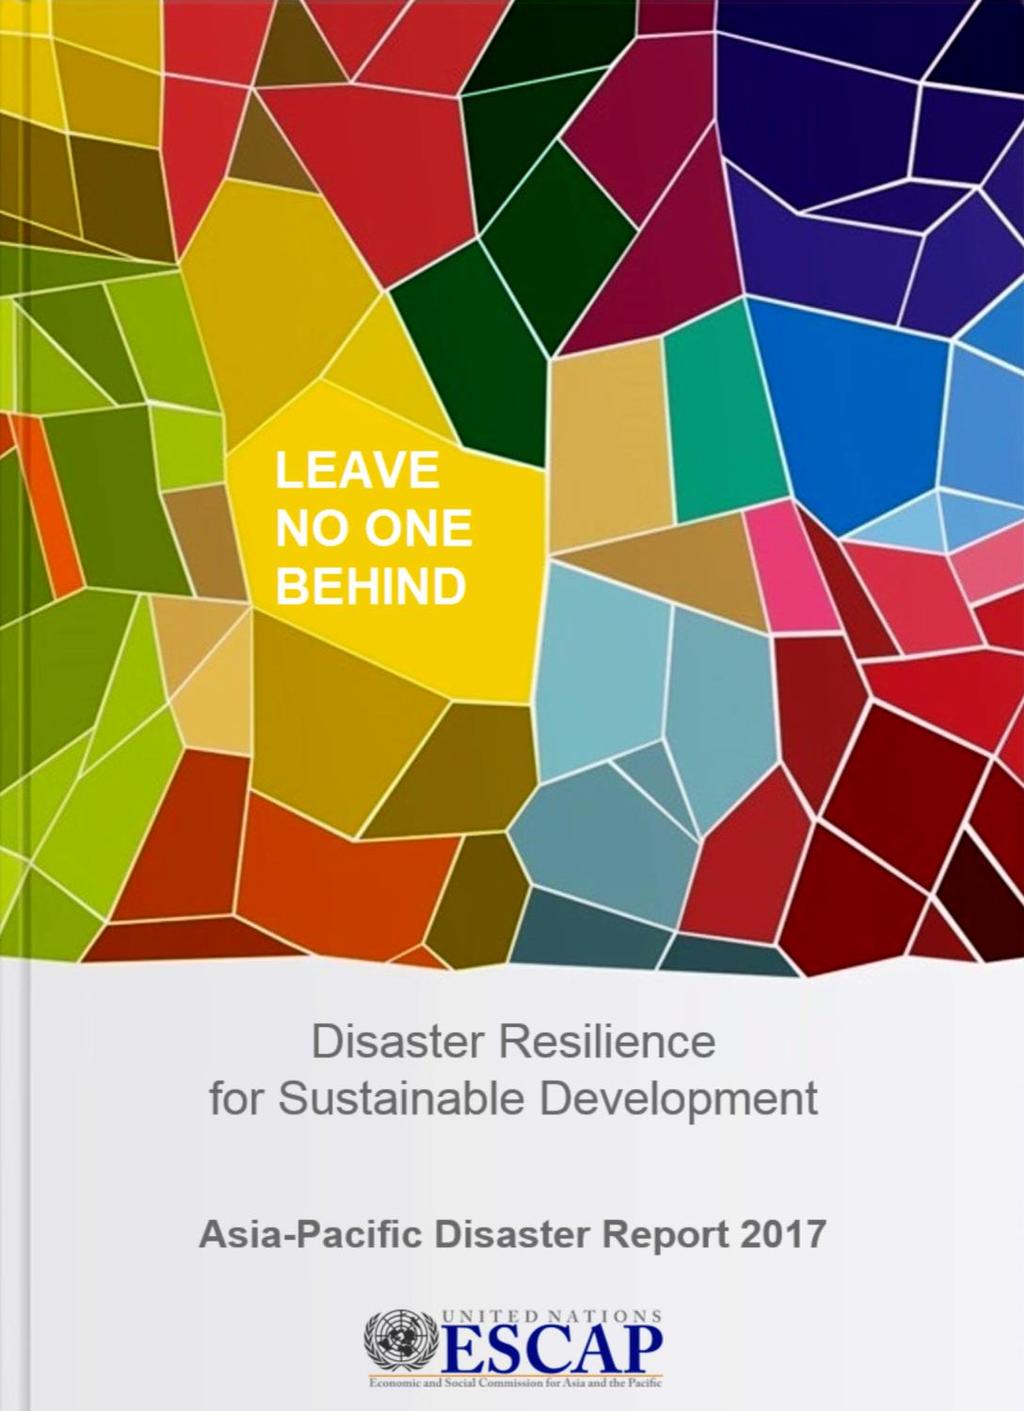 LEAVE NO ONE BEHIND Disaster Resilience for